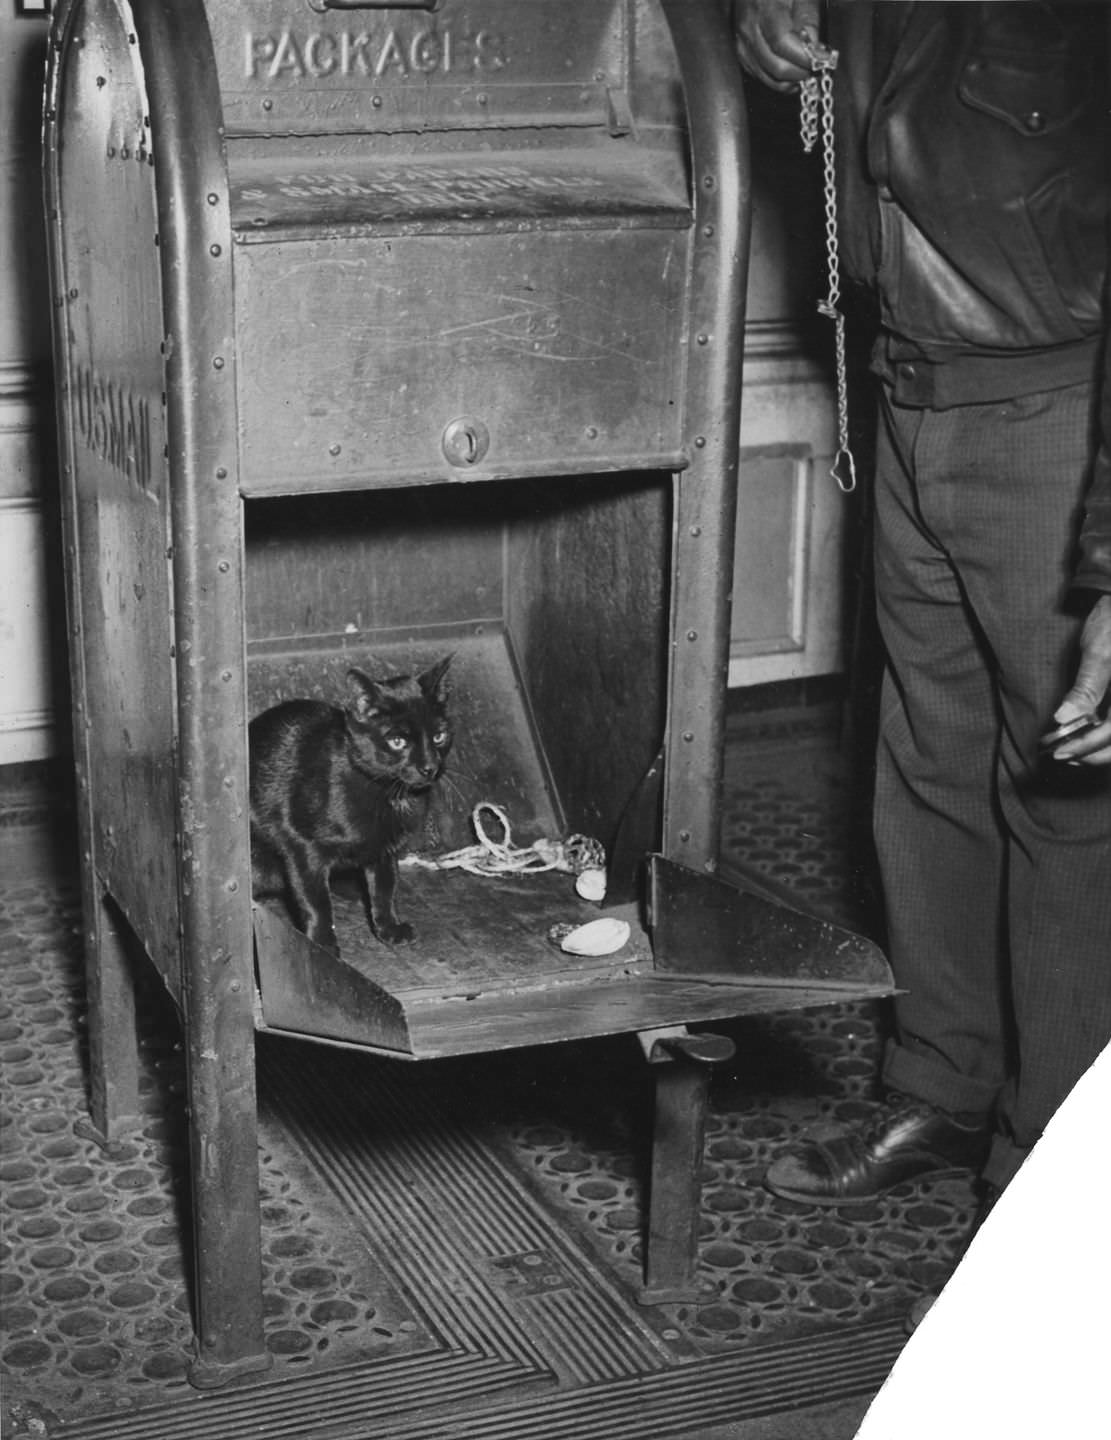 A Black Cat Found In A Mailbox With Pretzels And Clams, 1941.